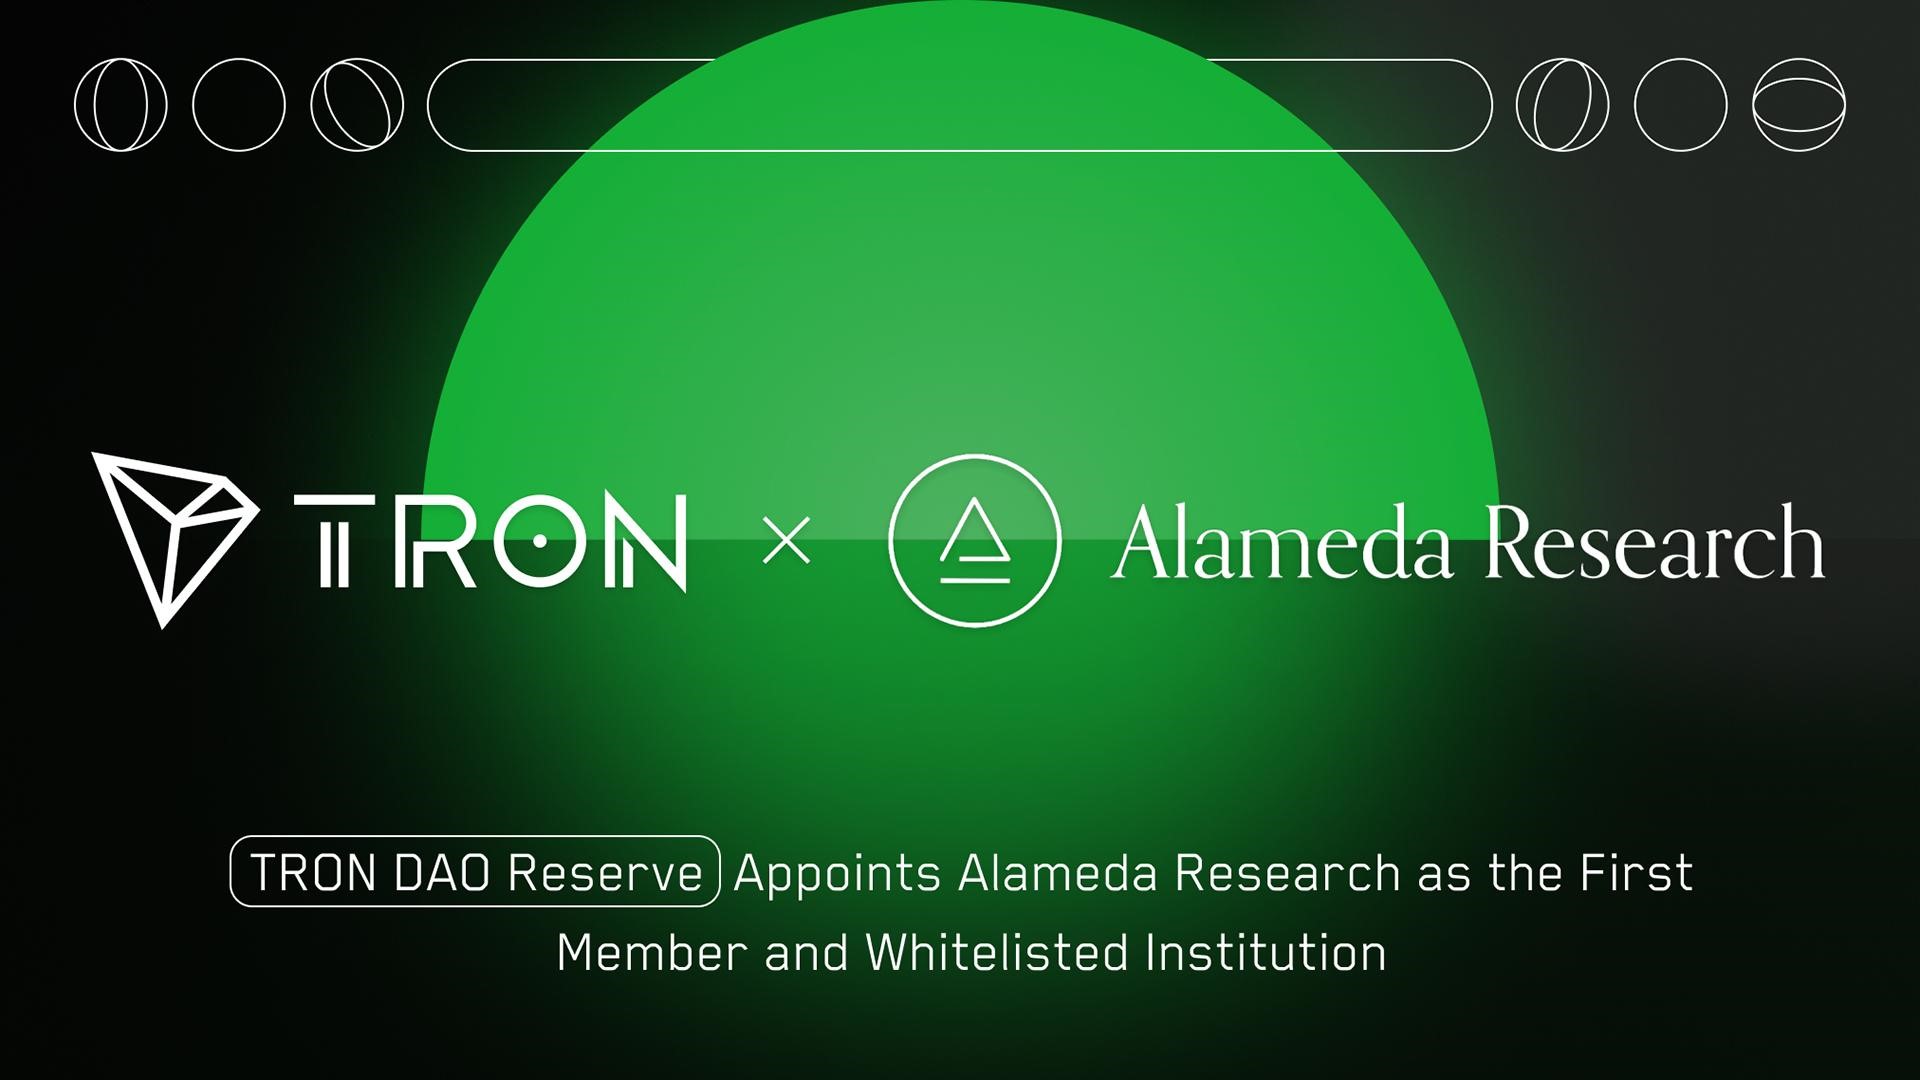 The TRON DAO Reserve has announced Alameda Research as the first Member and Whitelisted Institution to mint Decentralized USD (USDD).